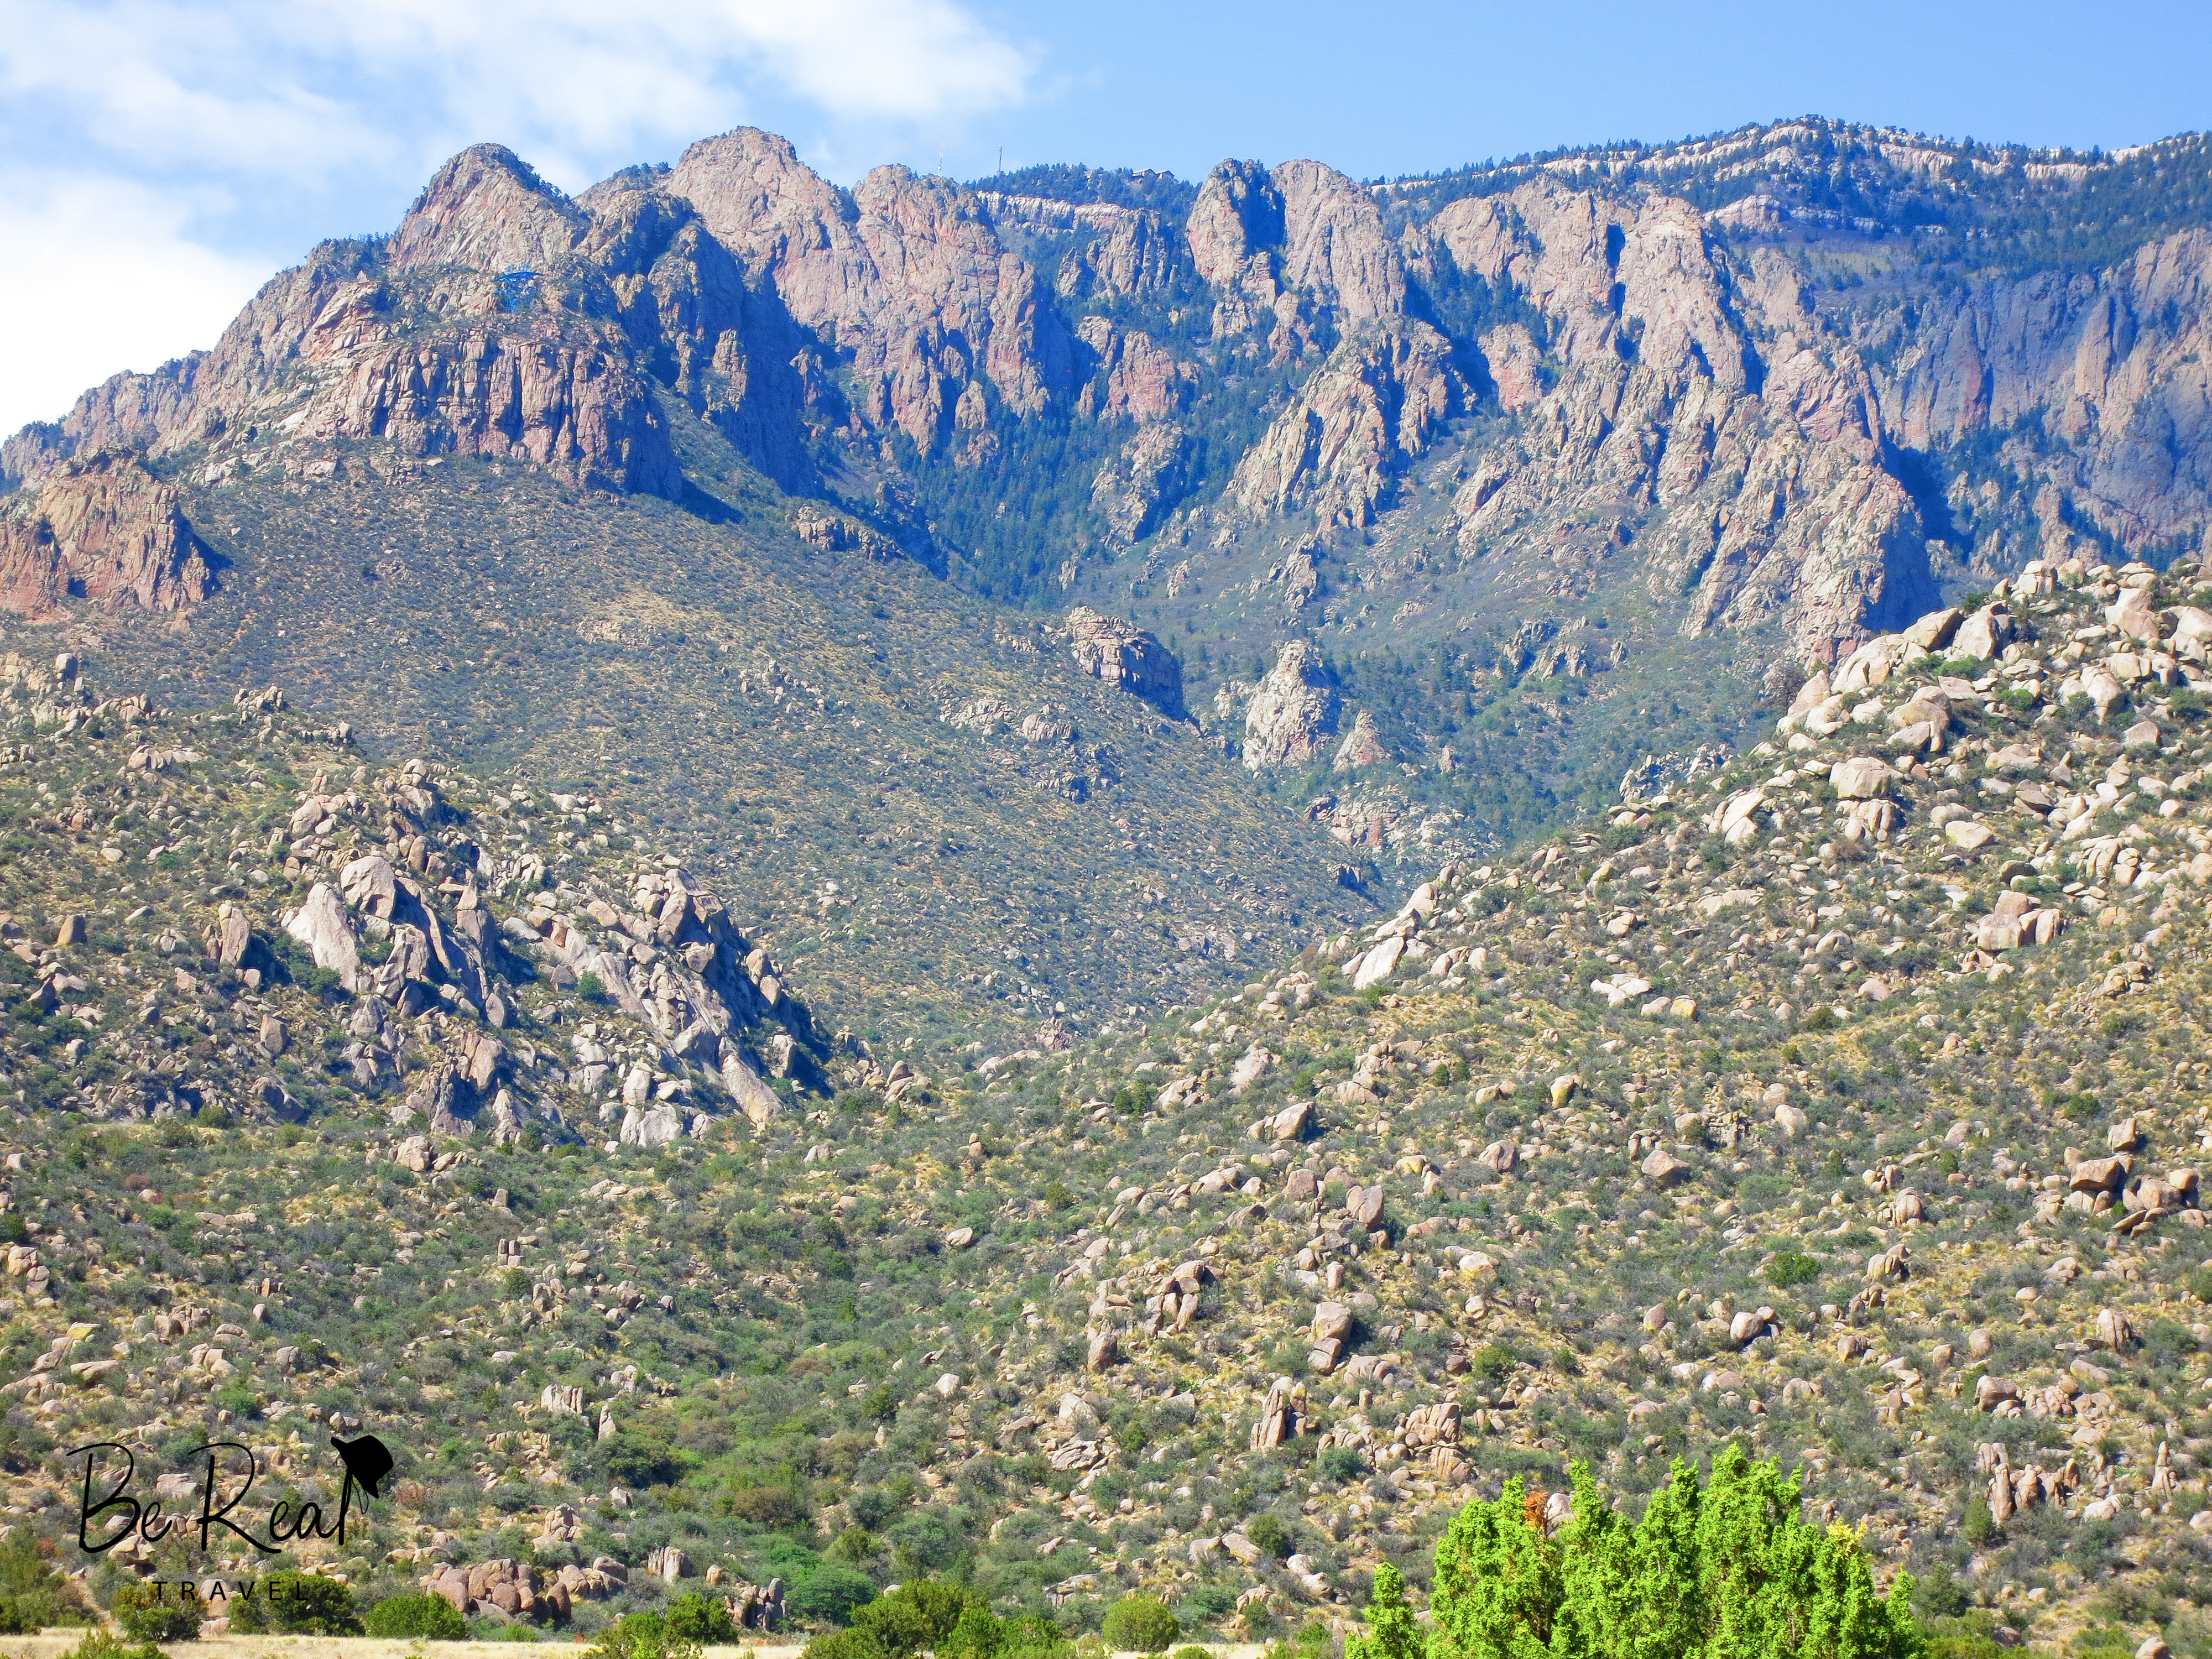 A close up of New Mexican mountains  shows rocky terrain with splashes of green sprinkled in